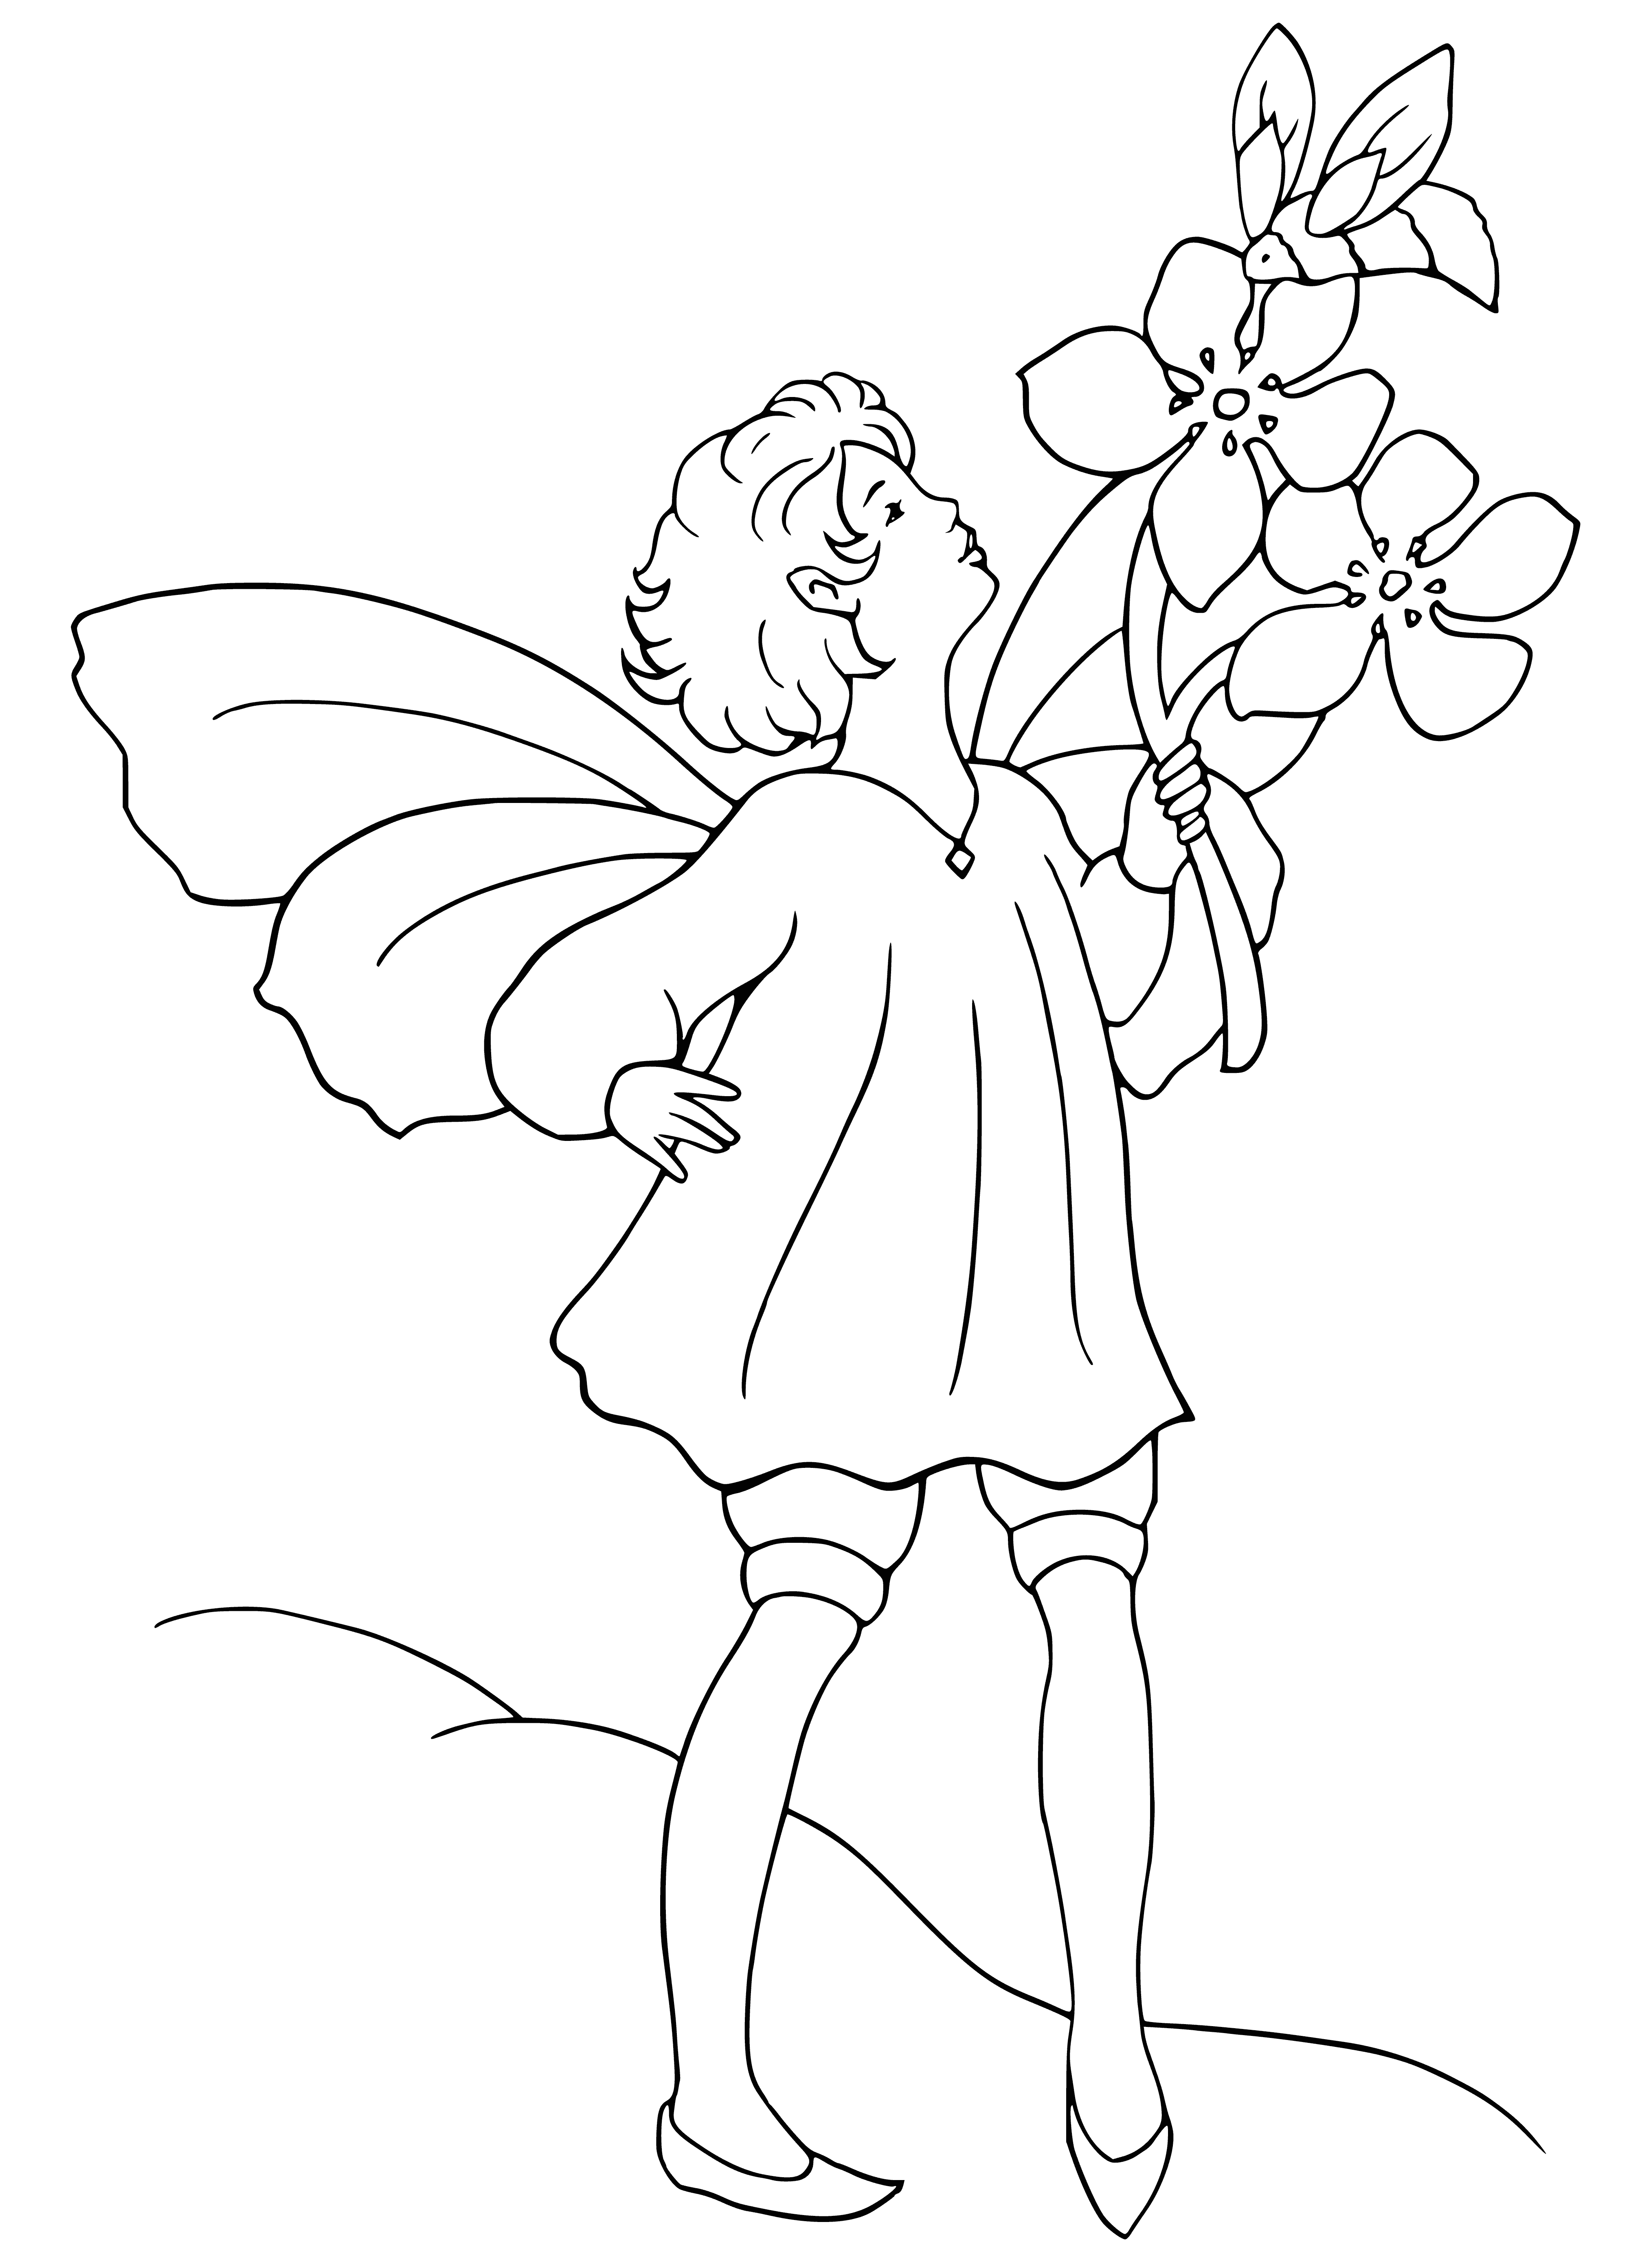 coloring page: Elf boy wearing green tunic, brown belt & bag, holding a staff on a log with pointed shoes.